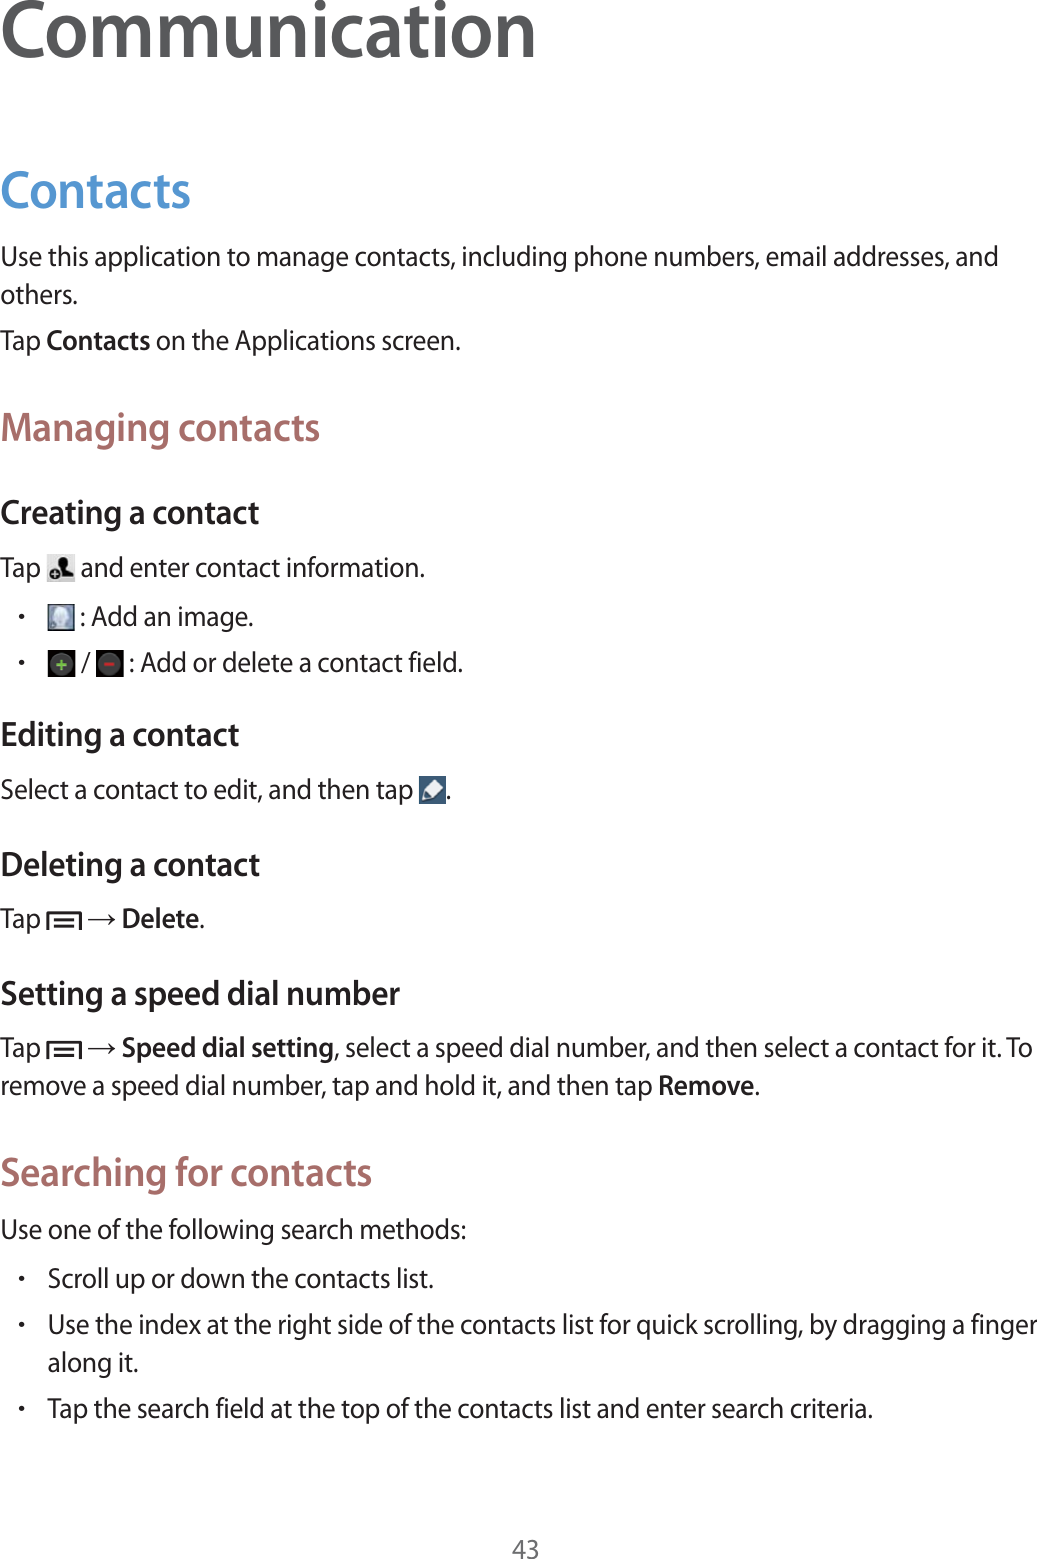 43CommunicationContactsUse this application to manage contacts, including phone numbers, email addresses, and others.Tap Contacts on the Applications screen.Managing contactsCreating a contactTap   and enter contact information.r : Add an image.r /   : Add or delete a contact field.Editing a contactSelect a contact to edit, and then tap  .Deleting a contactTap   ĺ Delete.Setting a speed dial numberTap   ĺ Speed dial setting, select a speed dial number, and then select a contact for it. To remove a speed dial number, tap and hold it, and then tap Remove.Searching for contactsUse one of the following search methods:rScroll up or down the contacts list.rUse the index at the right side of the contacts list for quick scrolling, by dragging a finger along it.rTap the search field at the top of the contacts list and enter search criteria.